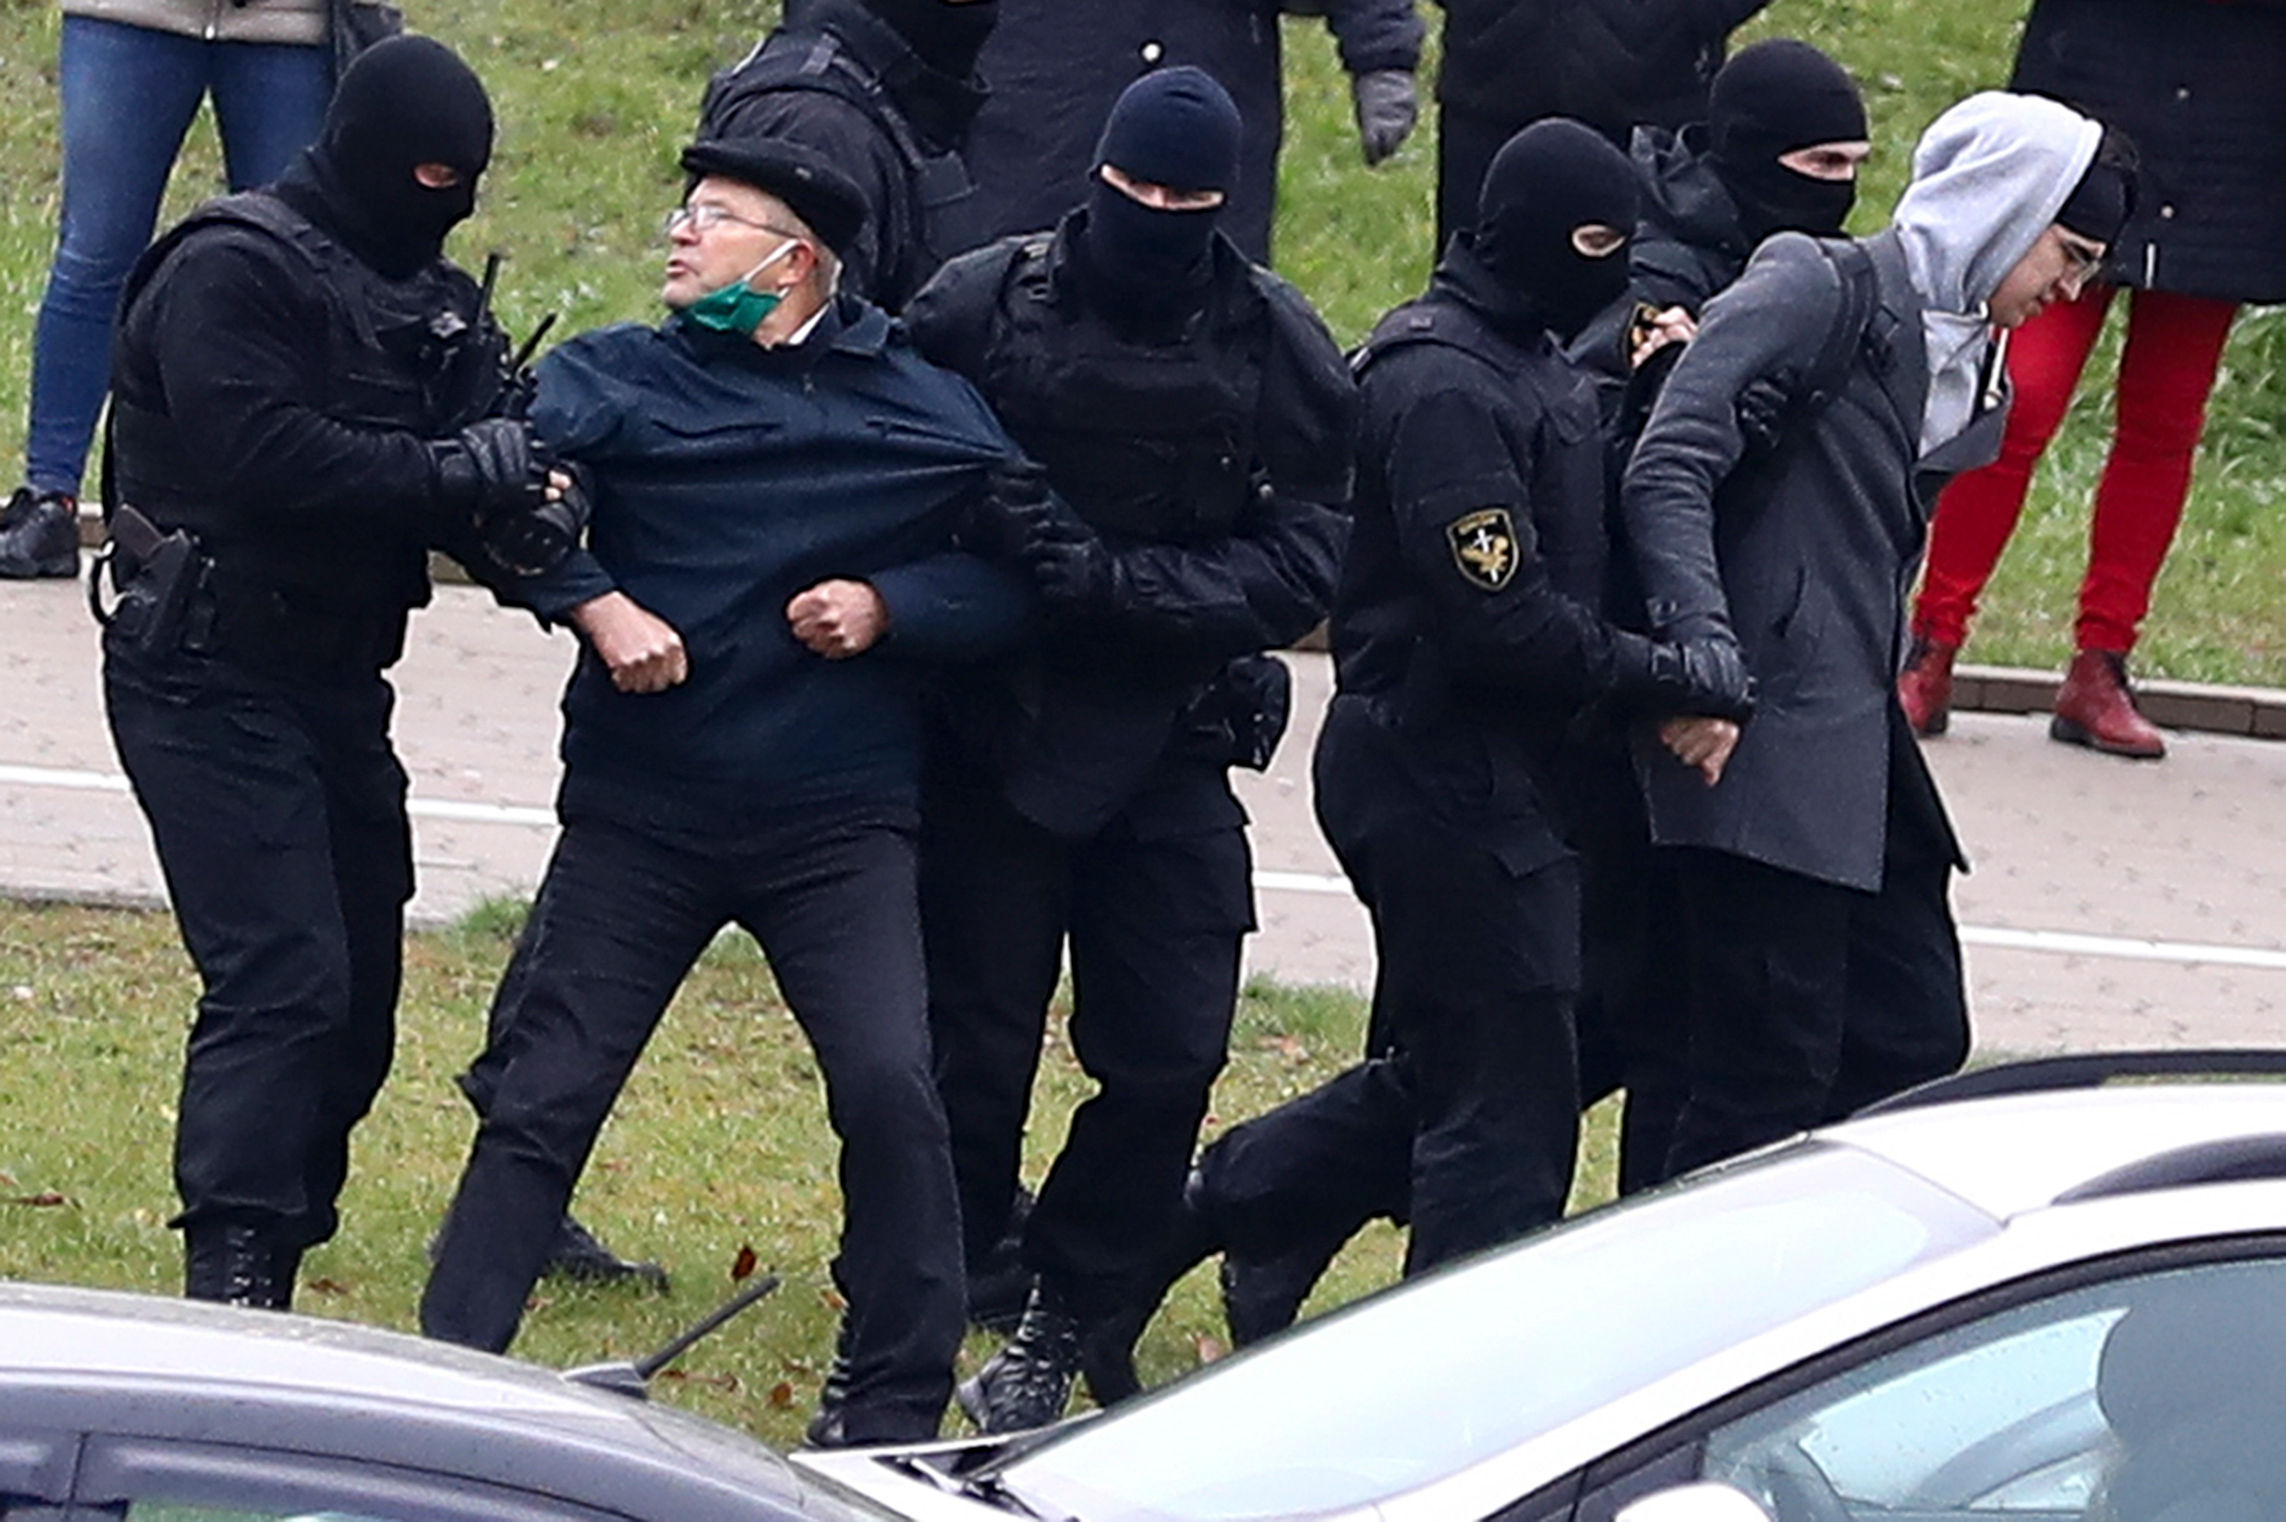 At least 700 jailed in Belarus in wake of protester’s death